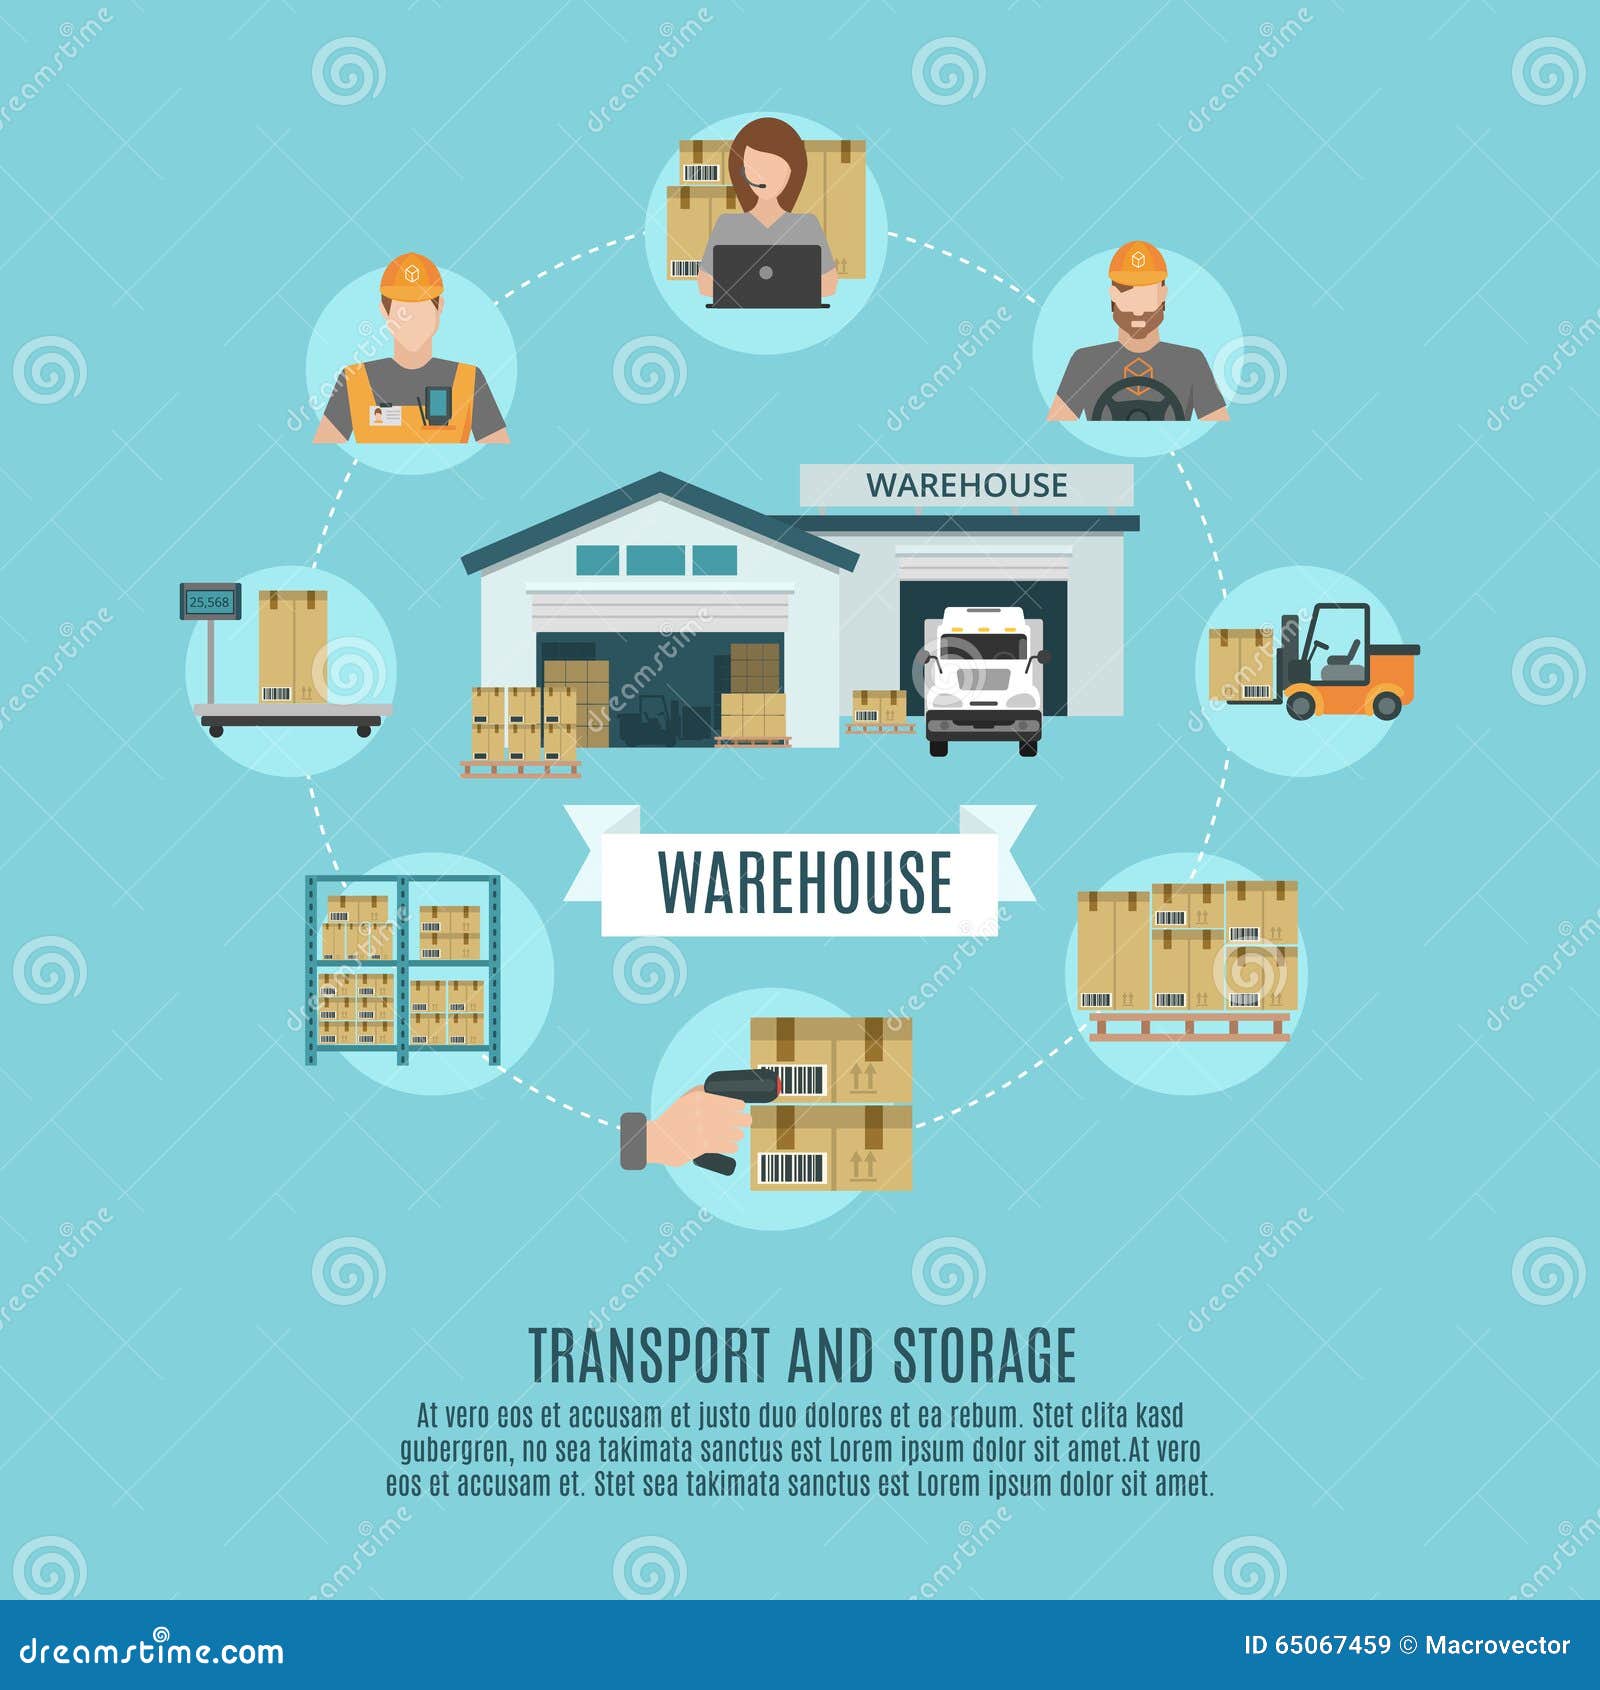 warehouse facilities concept flat icon poster